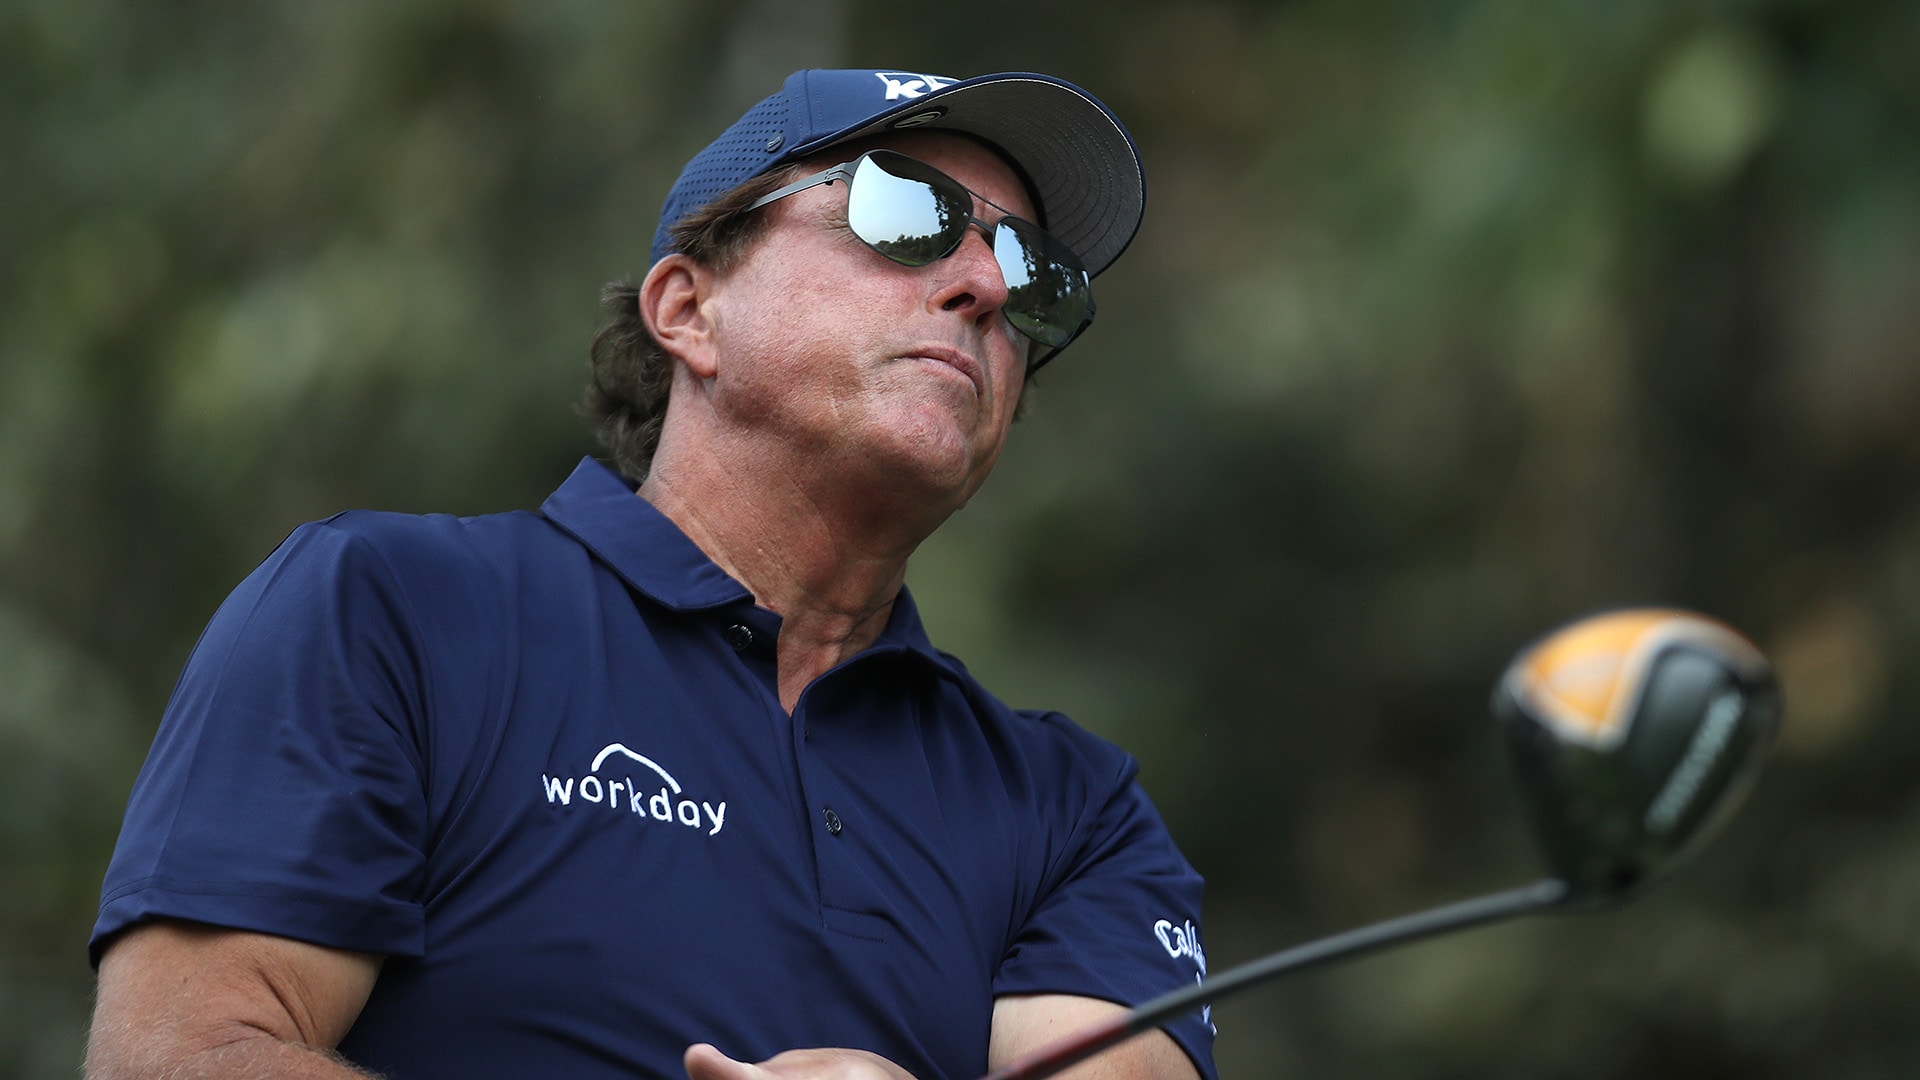 Accuracy off the tee an issue for Phil Mickelson heading into U.S. Open